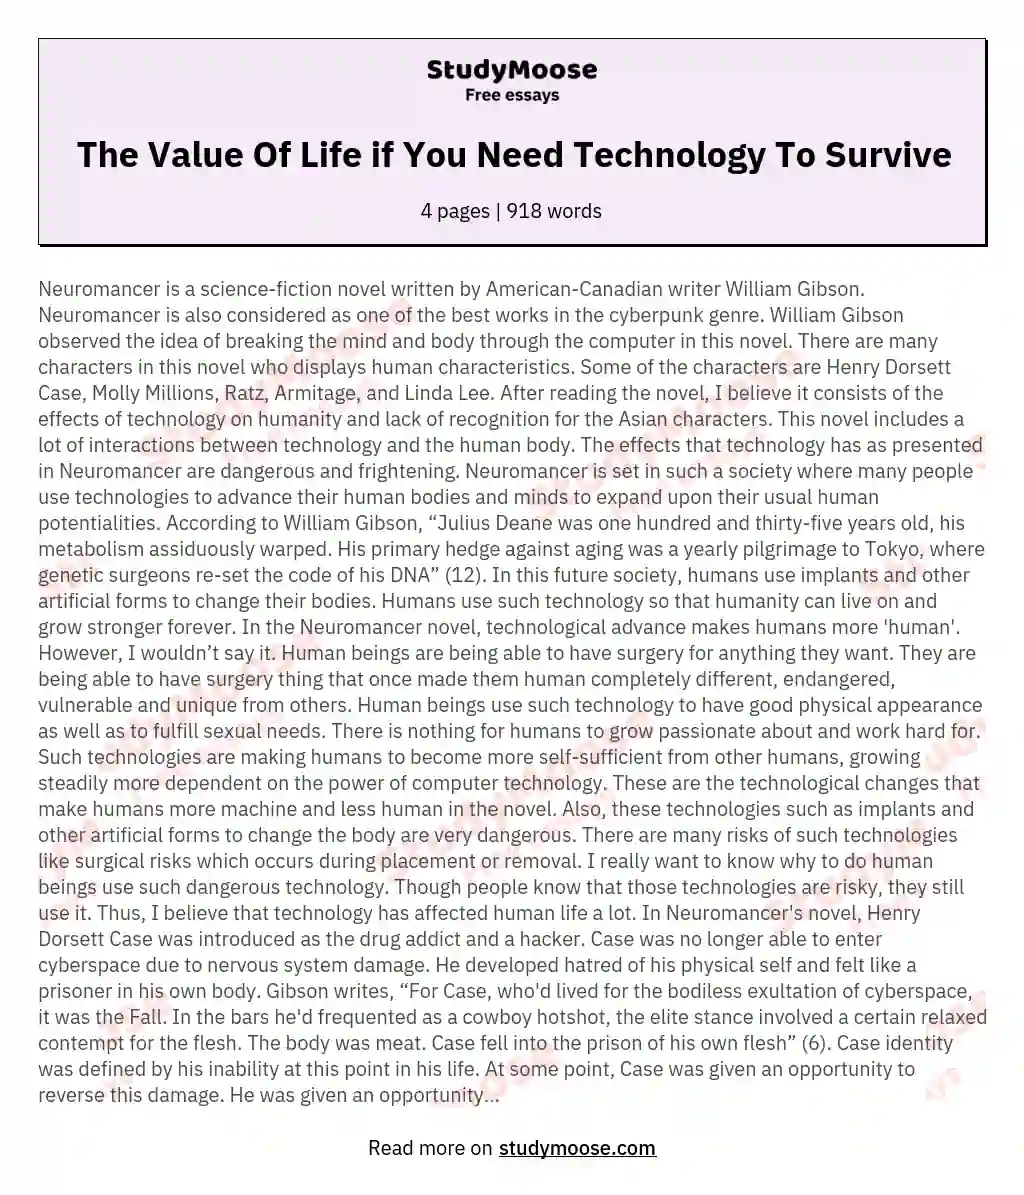 The Value Of Life if You Need Technology To Survive essay